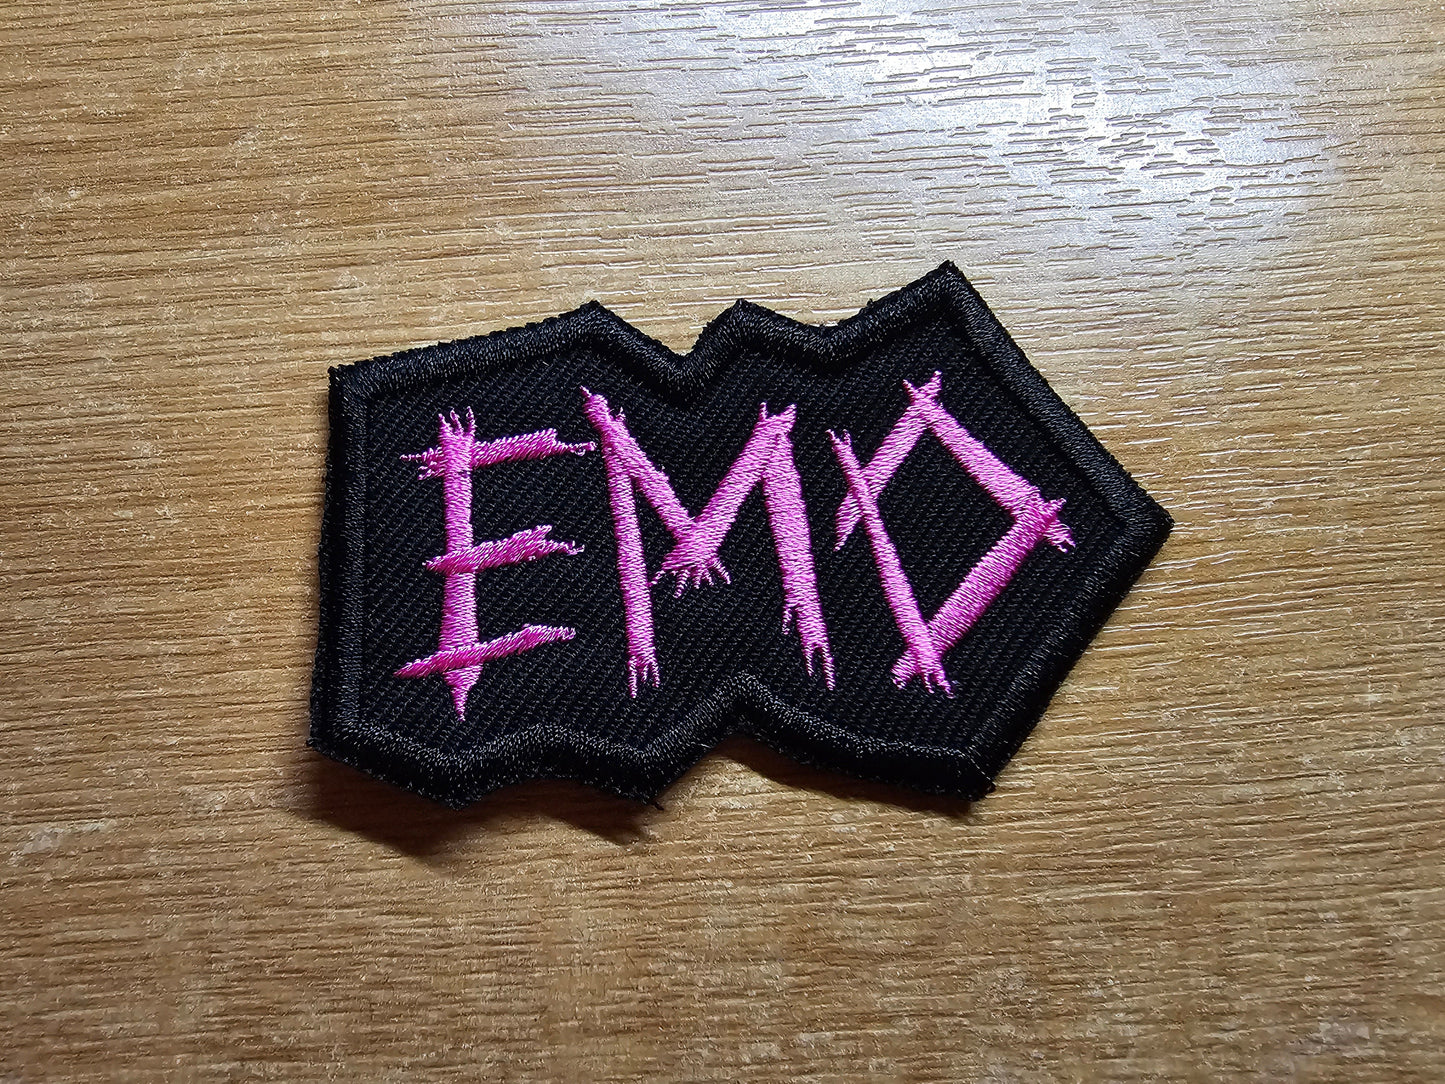 Emo Embroidered Patch Pop Punk Metalcore 00s Culture Throwback Pink